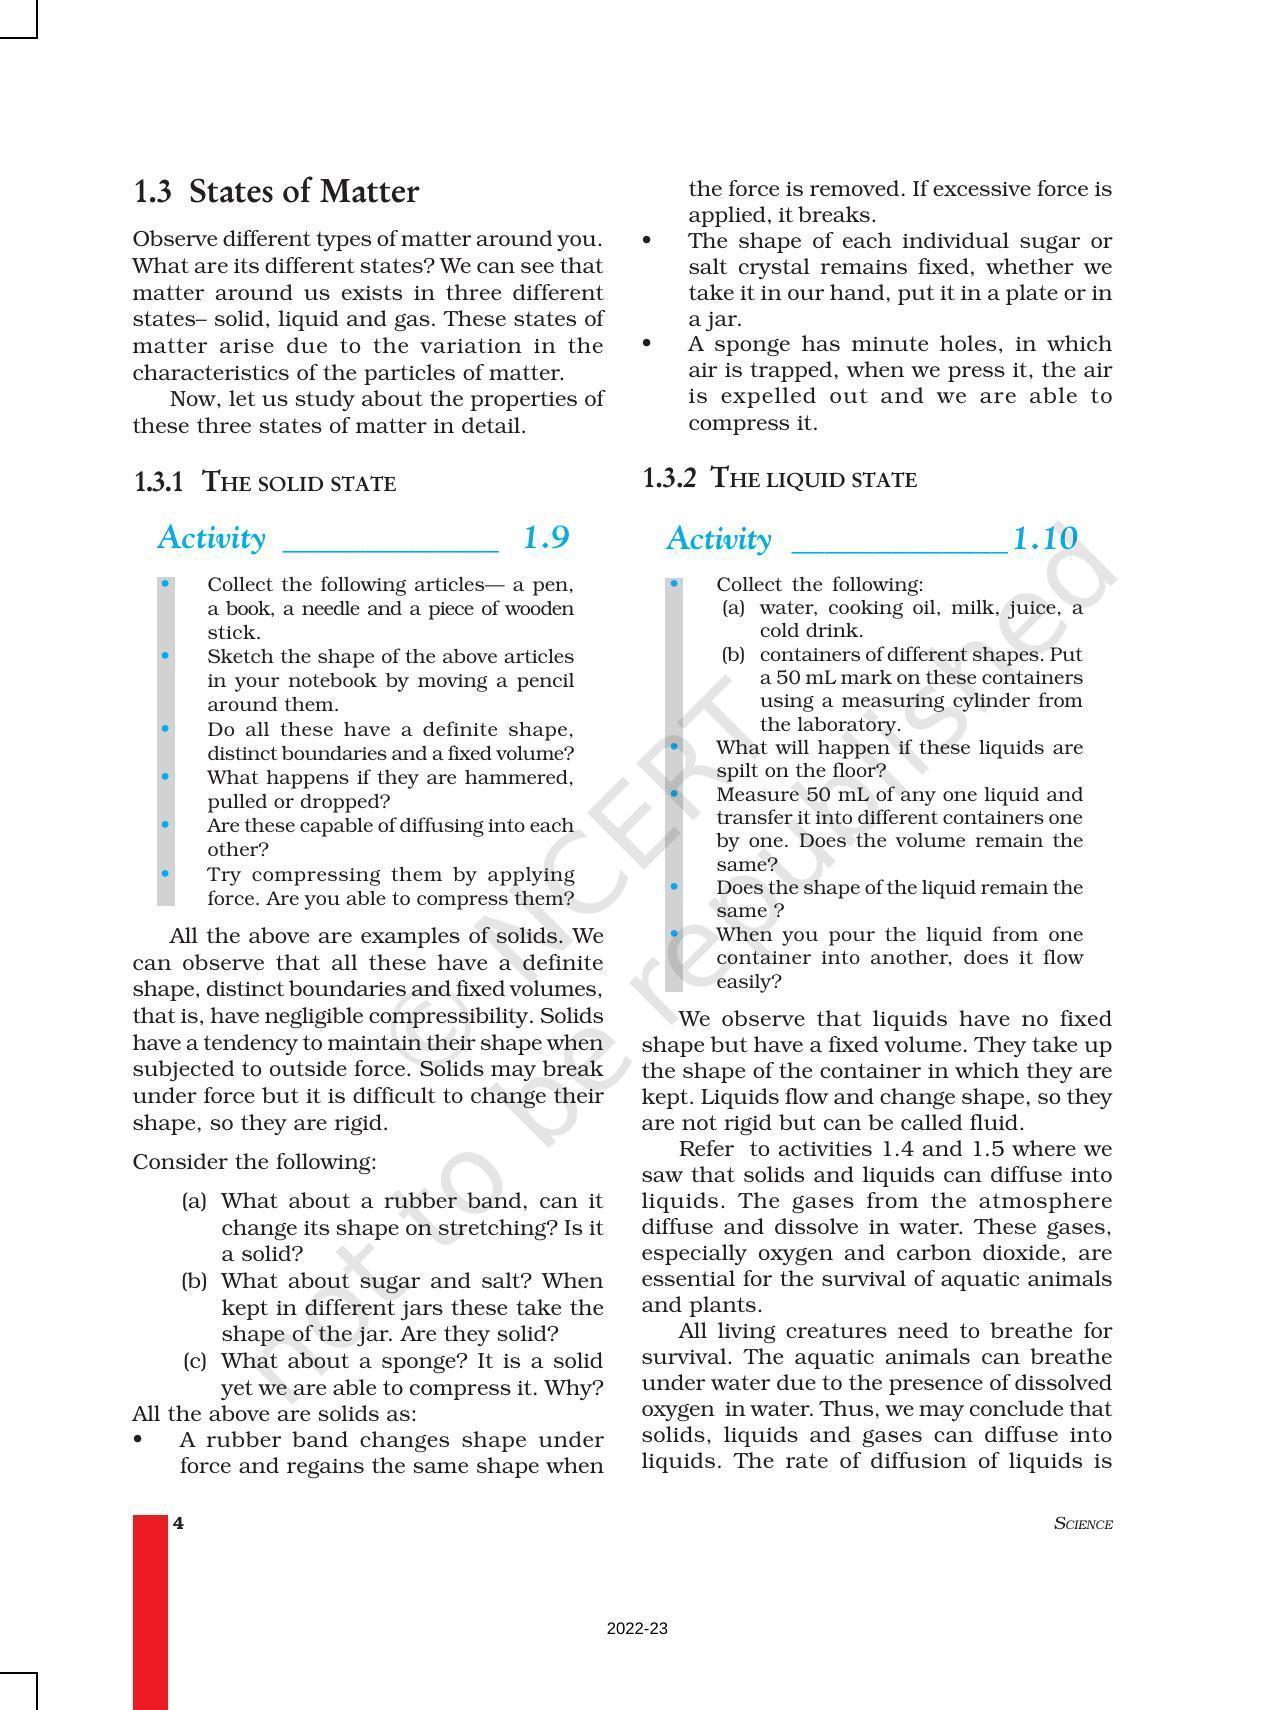 NCERT Book for Class 9 Science Chapter 1 Matter in Our Surroundings - Page 4